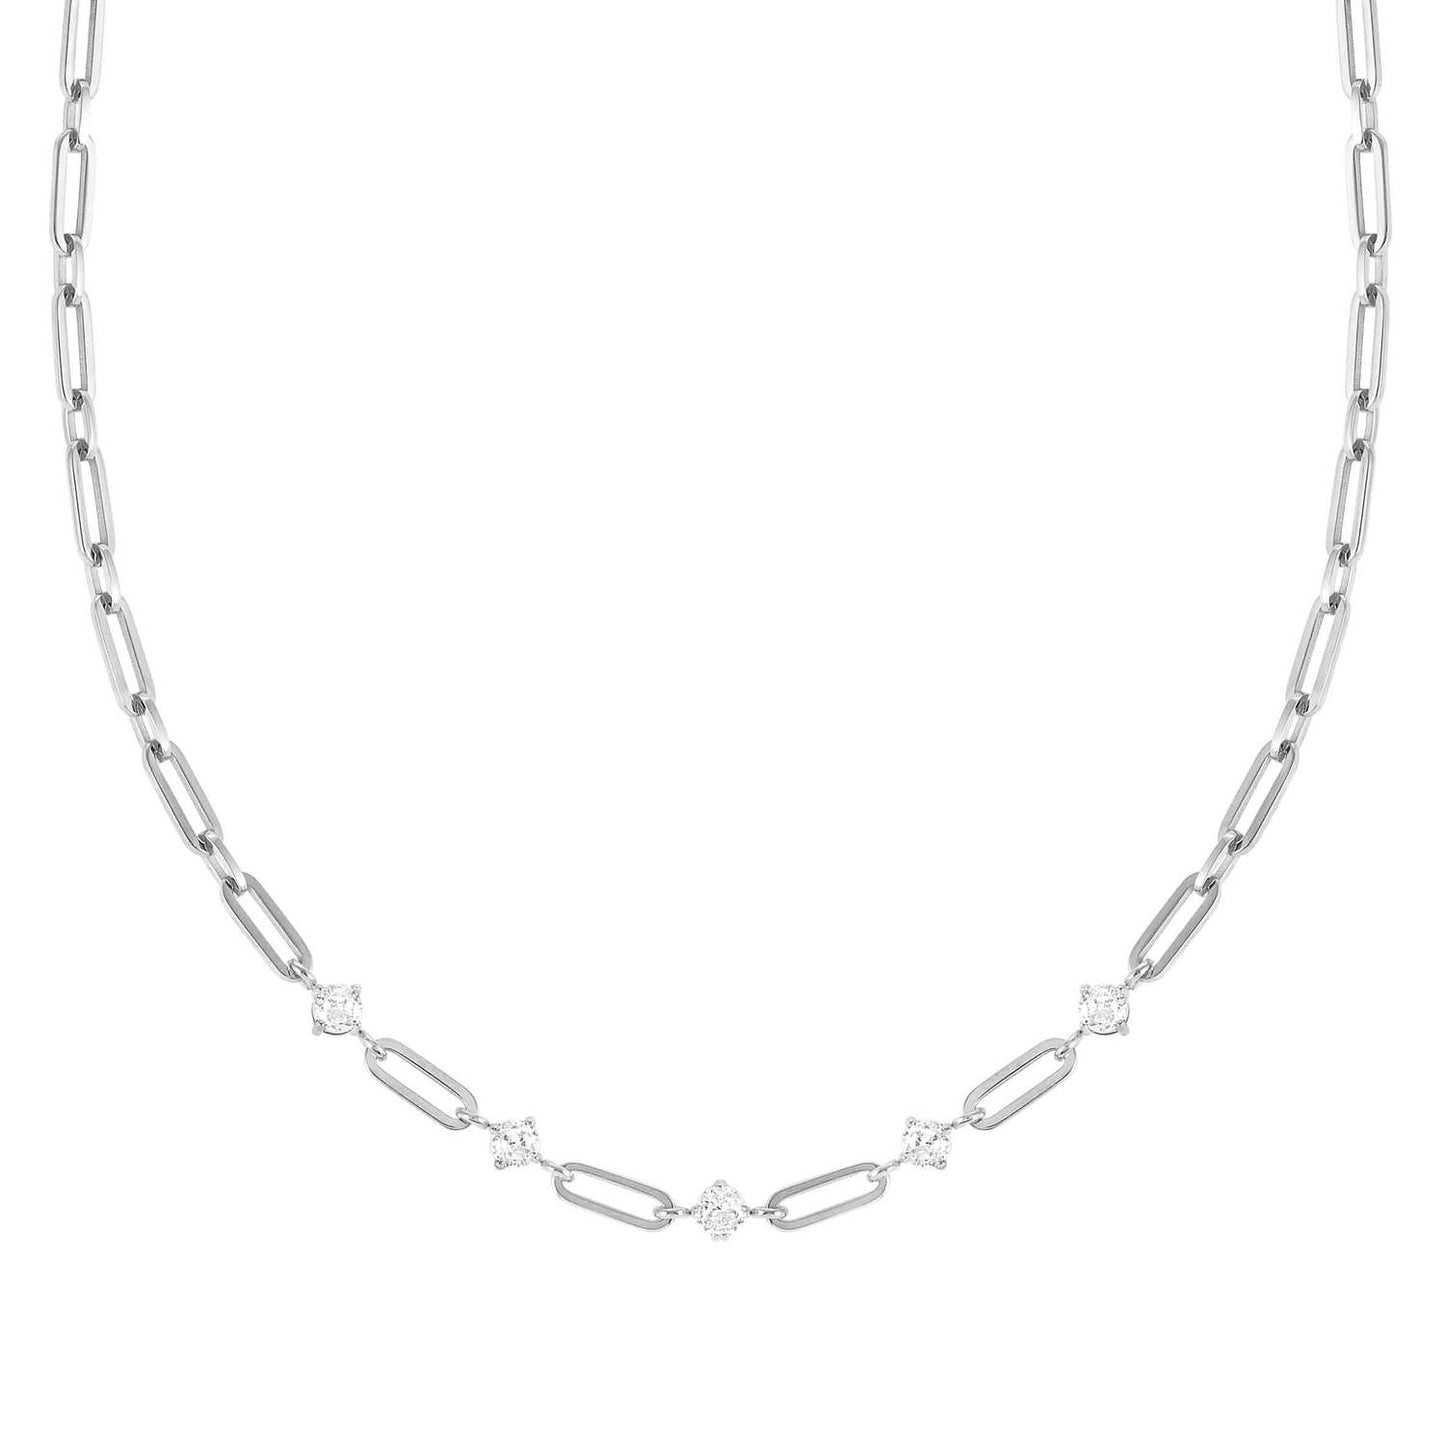 029401/001 CHAINSOFSTYLE Stainless Steel and CZ Necklace